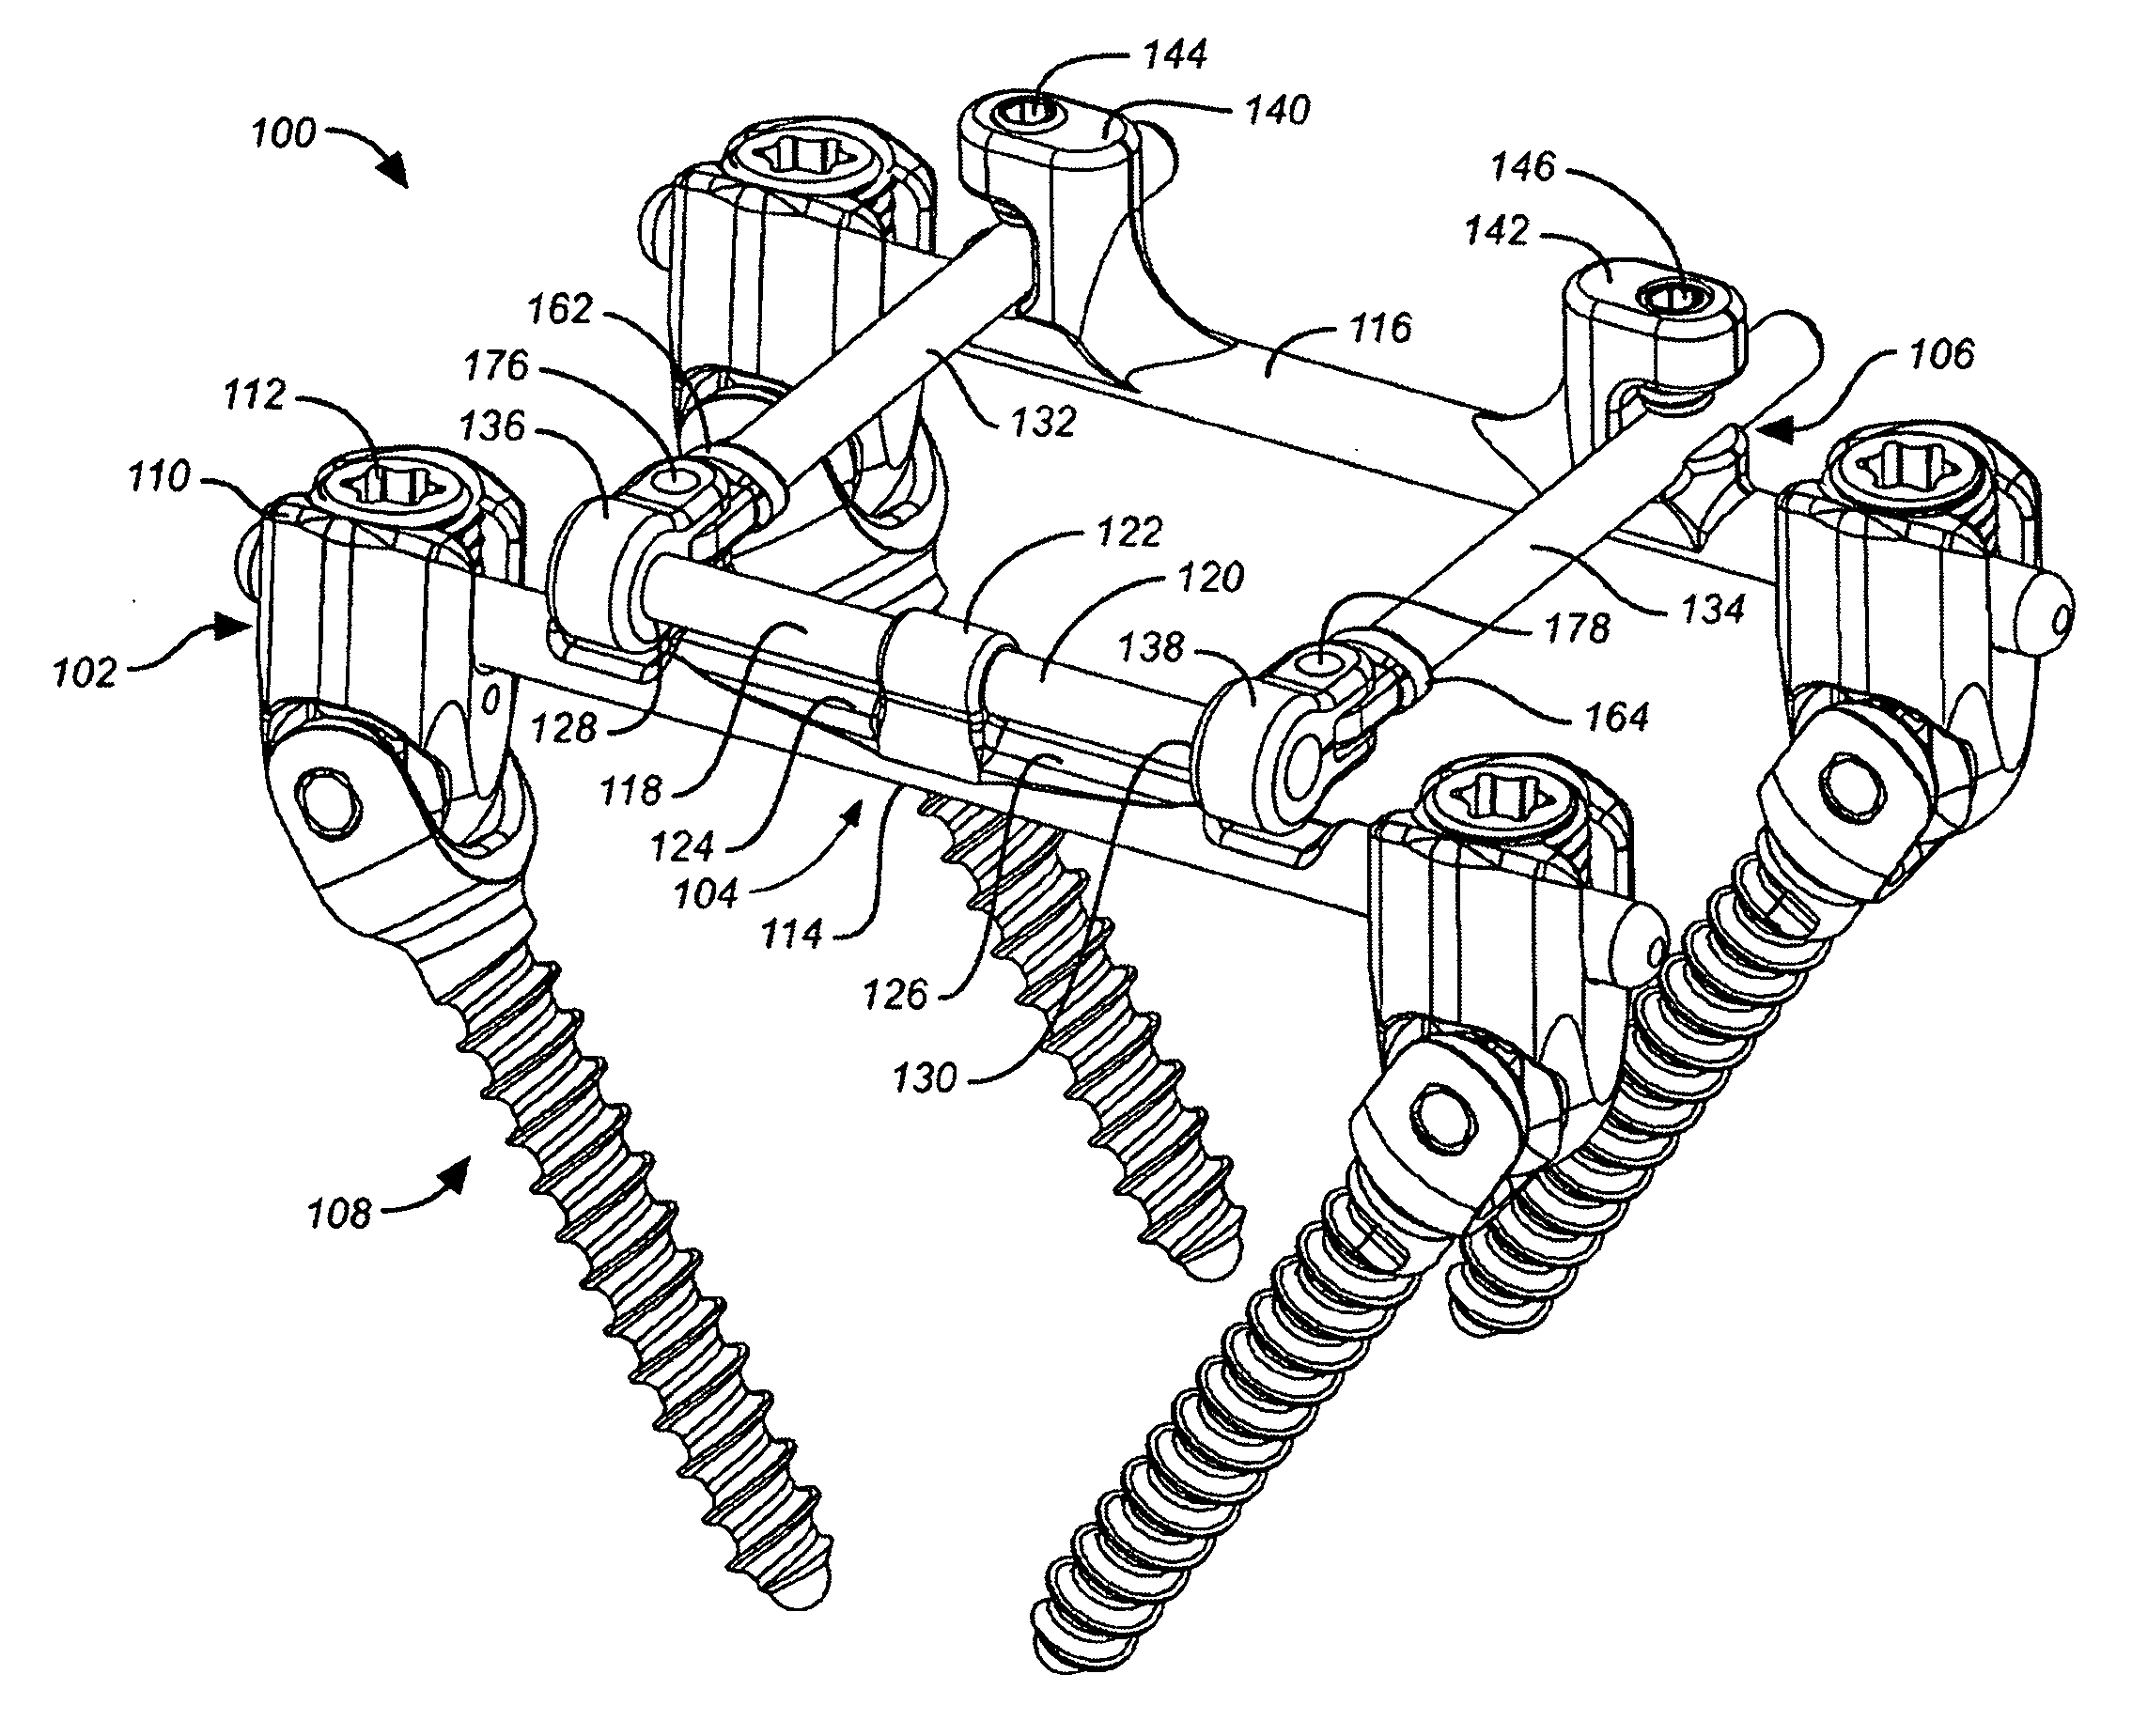 Deflection rod system dimensioned for deflection to a load characteristic for dynamic stabilization and motion preservation spinal implantation system and method